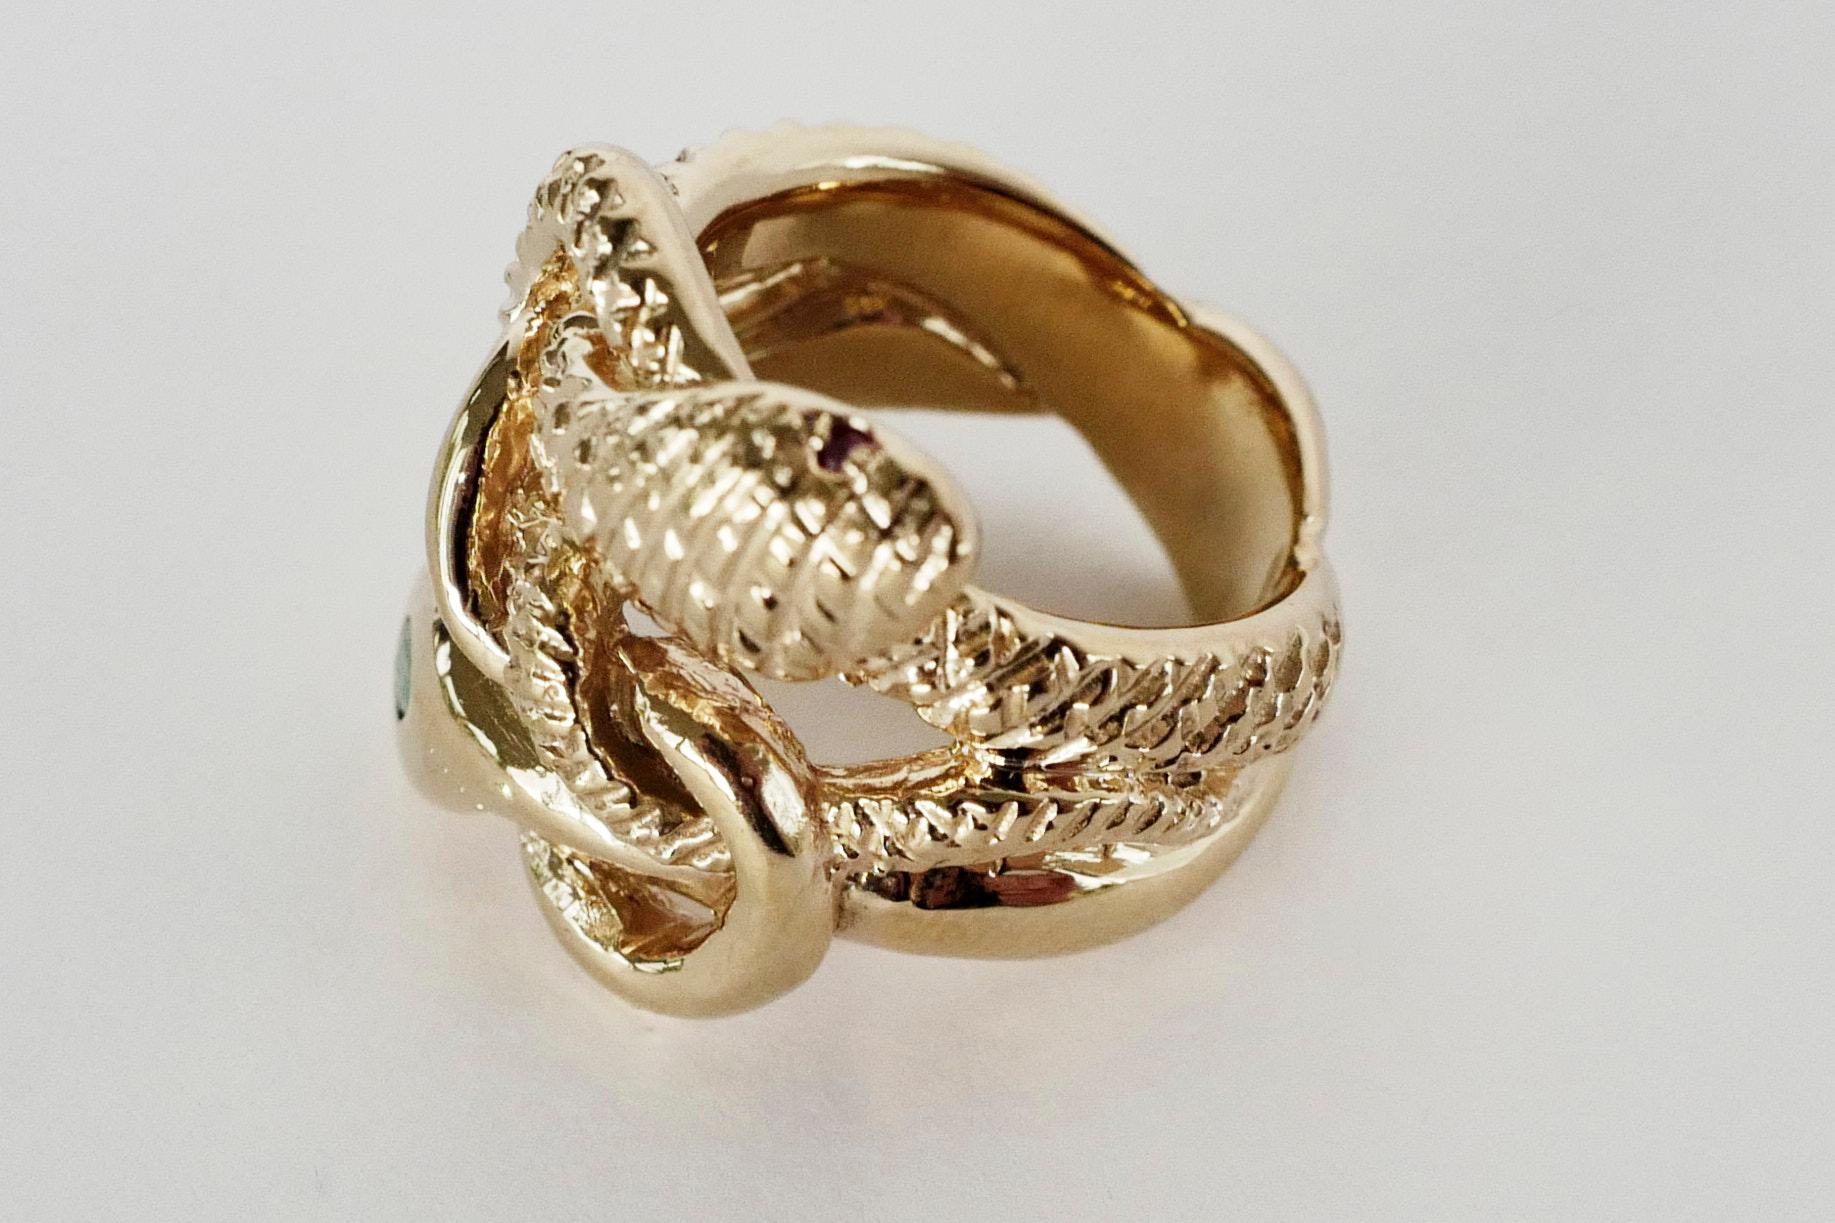 Emerald White Diamond Snake Ring Ruby Eyes Bronze Victorian Style J Dauphin For Sale 2